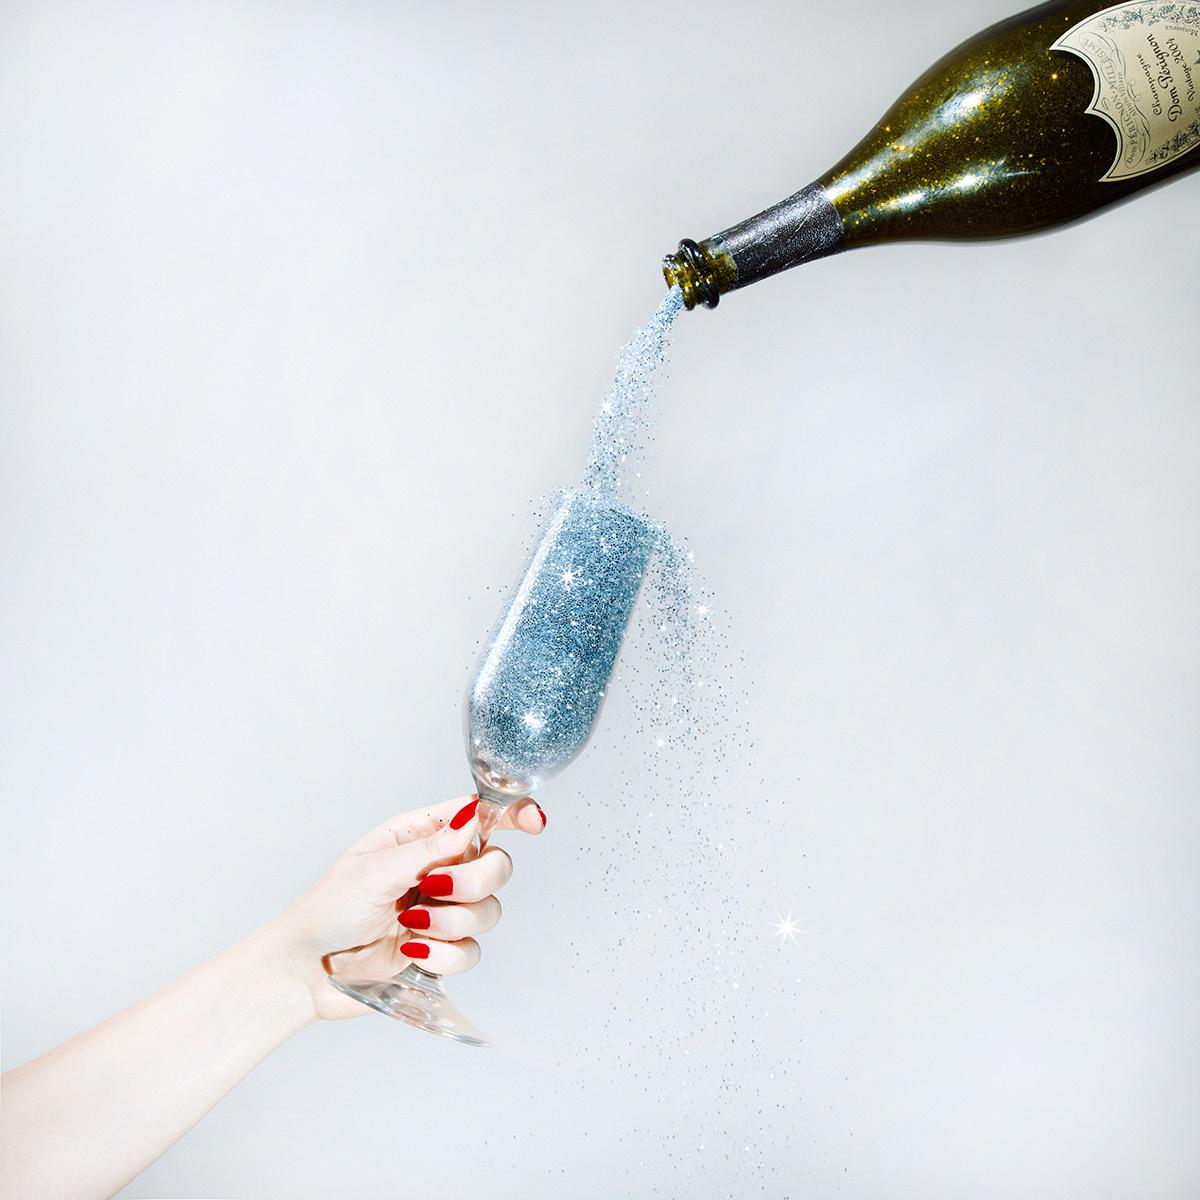 Tyler Shields - Glitter Champagne, Photography 2019, Printed After